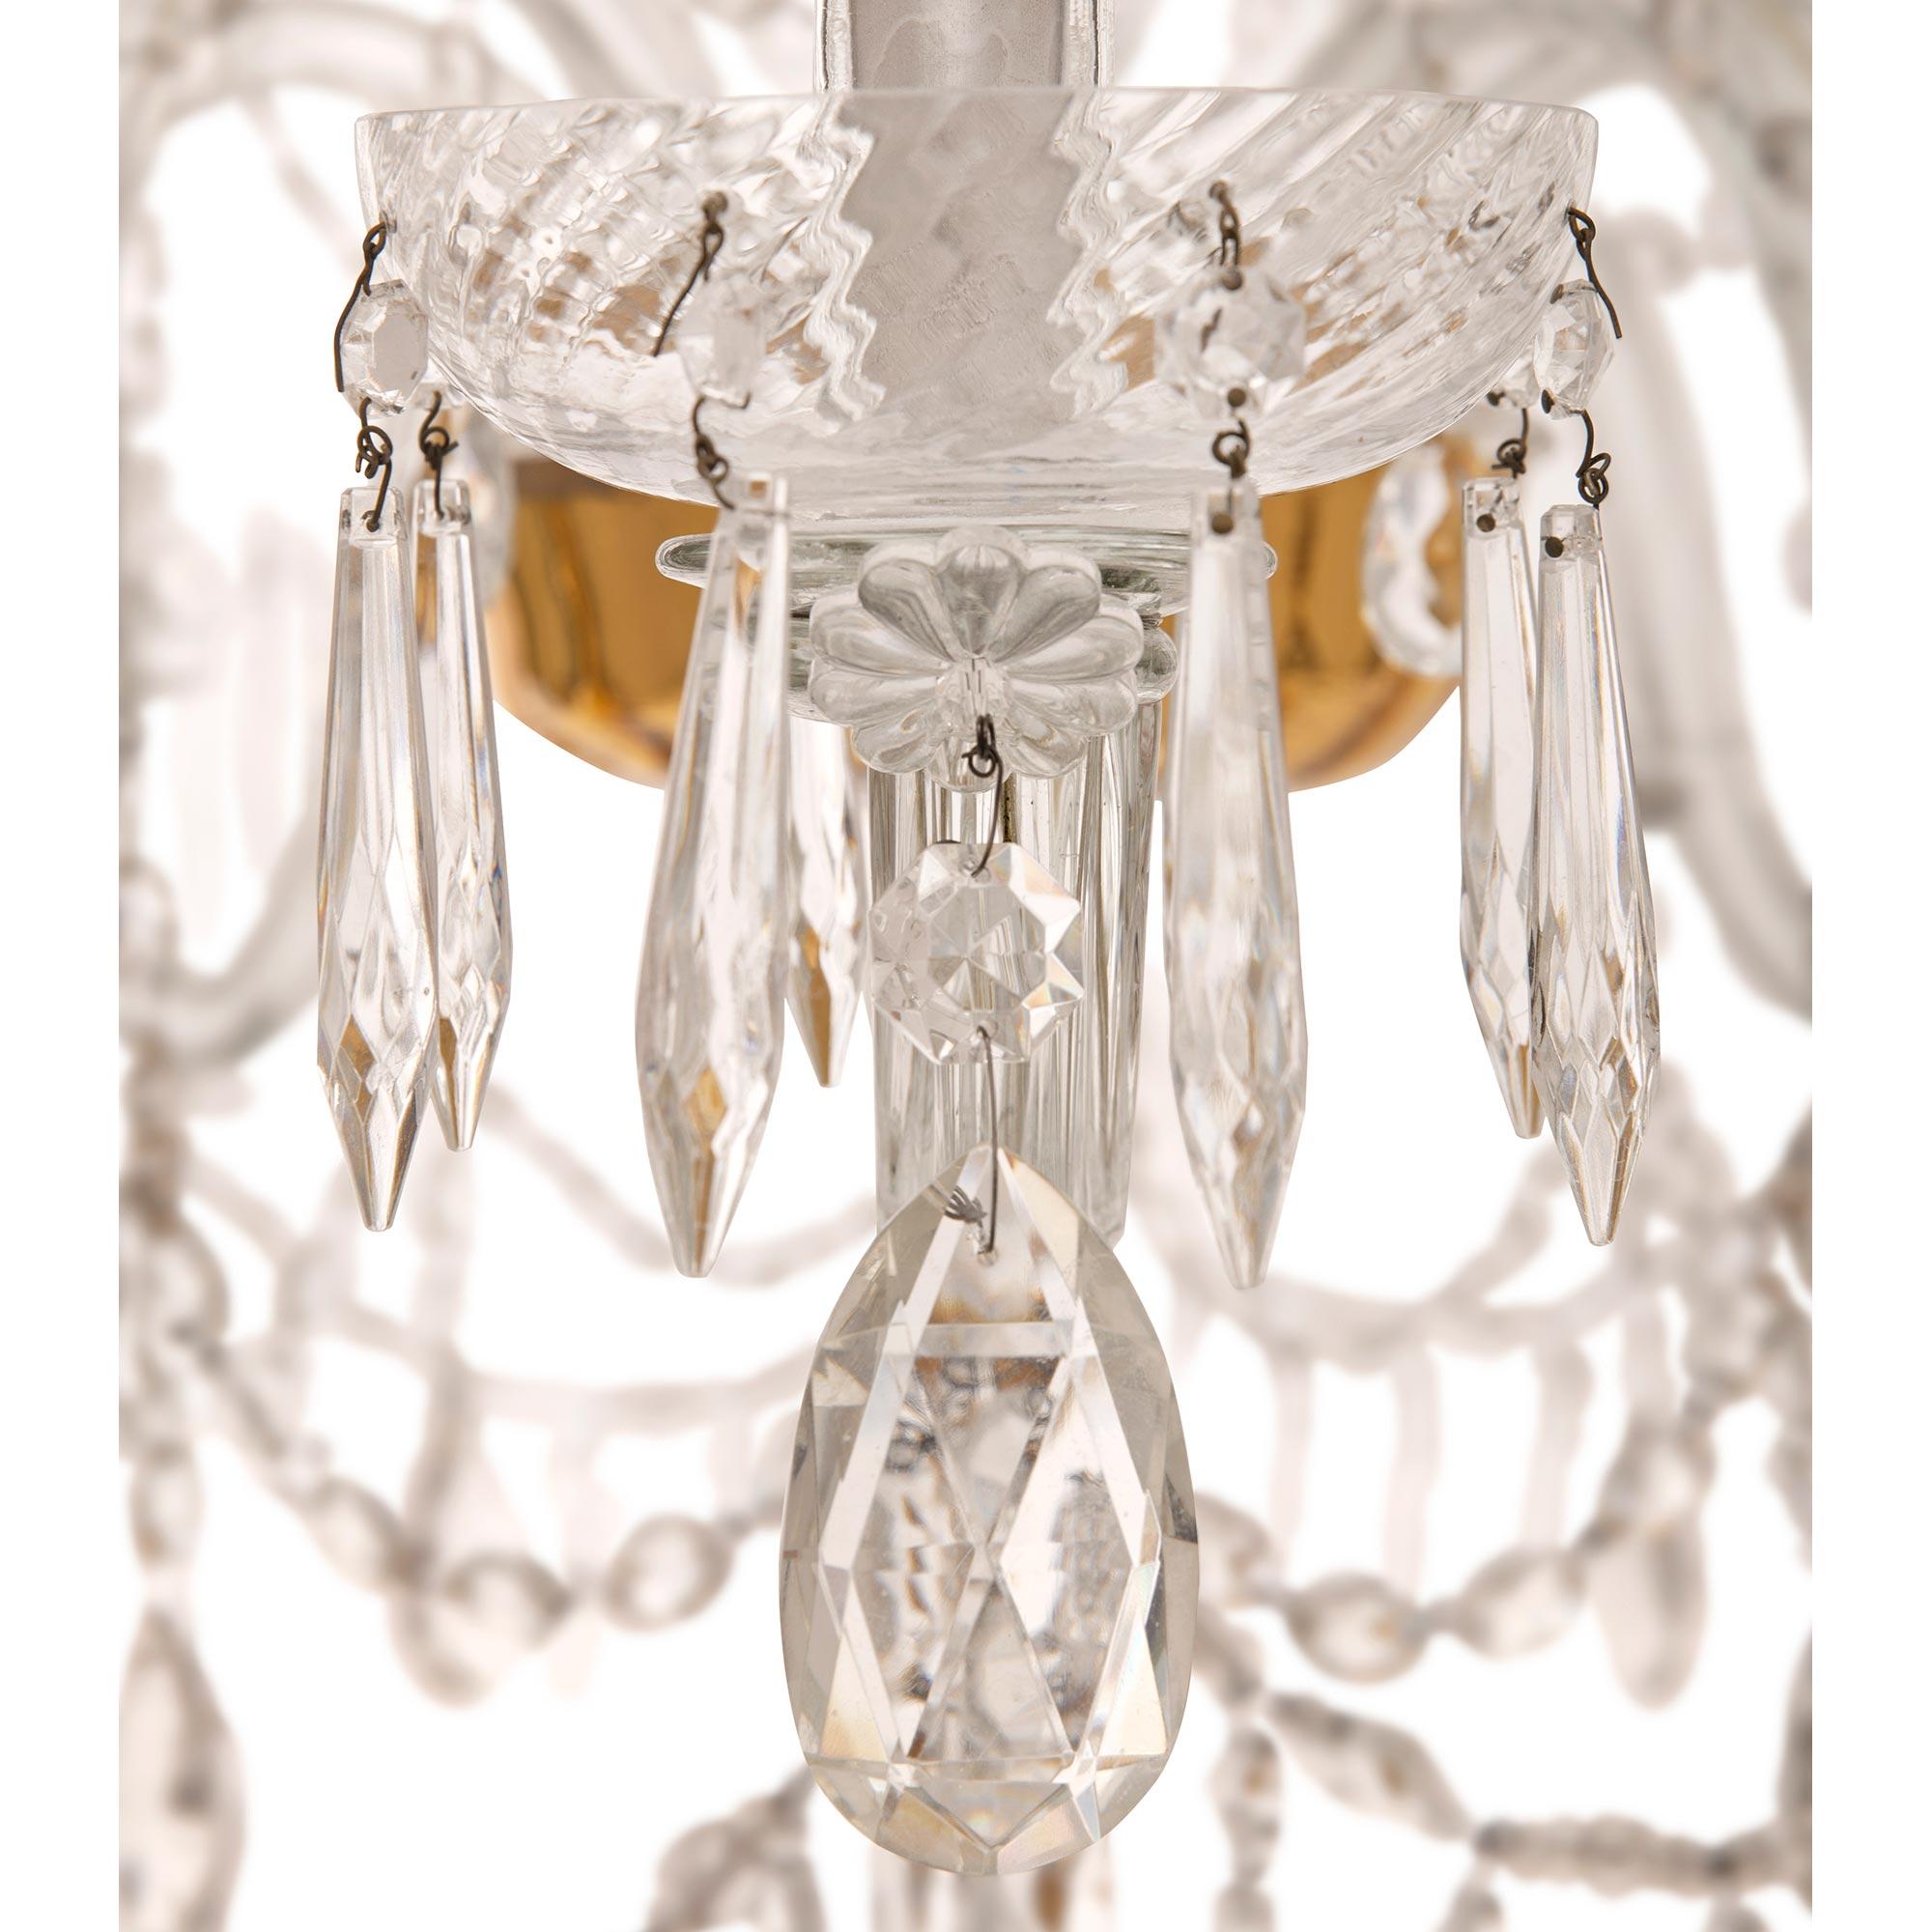 Italian 18th Century Venetian St. Murano Glass and Giltwood Chandelier For Sale 4